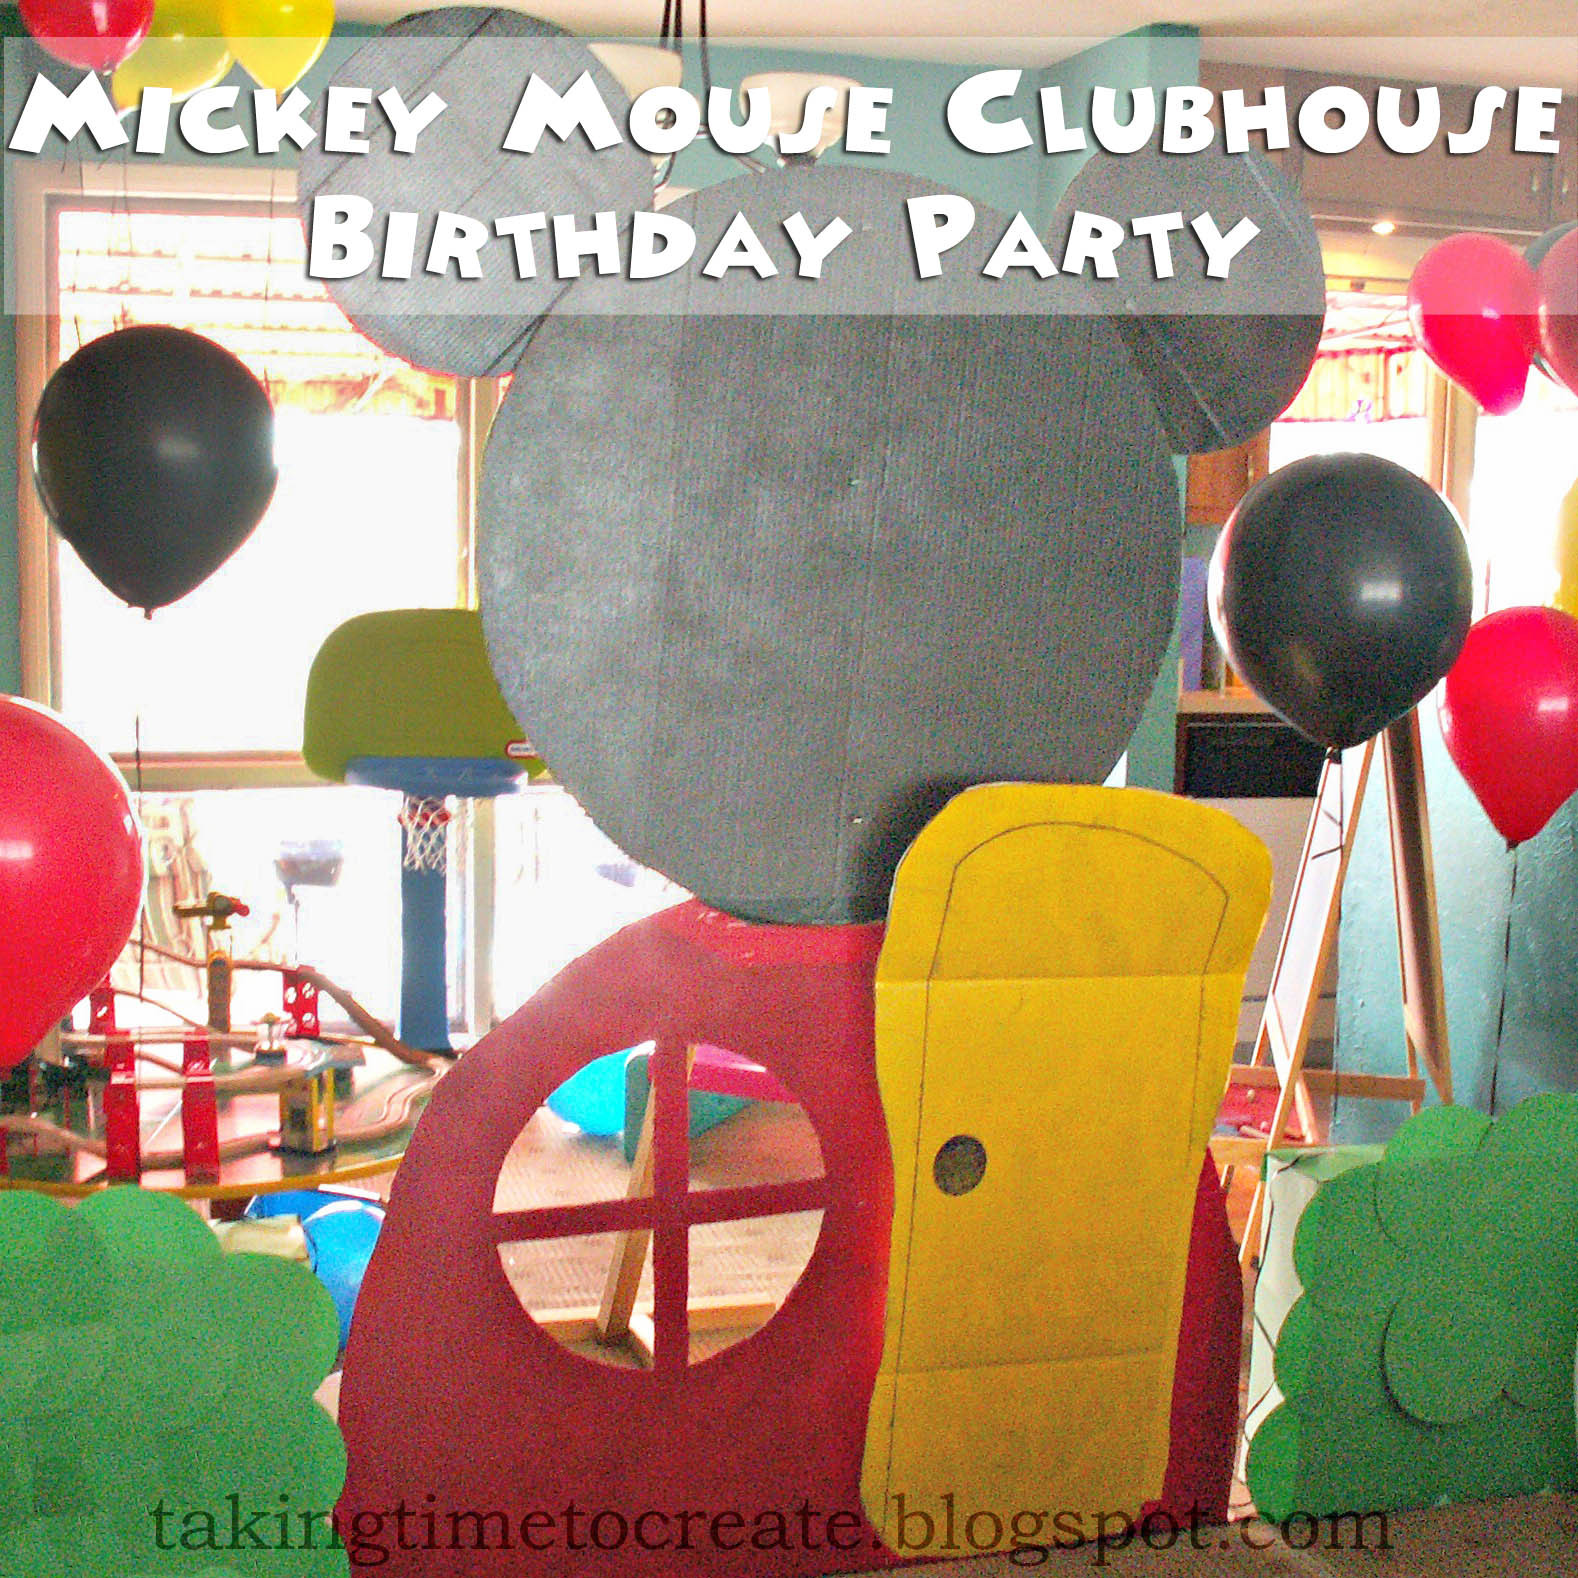 Mickey Mouse Clubhouse Birthday Party Decorations
 Taking Time To Create Mickey Mouse Clubhouse Birthday